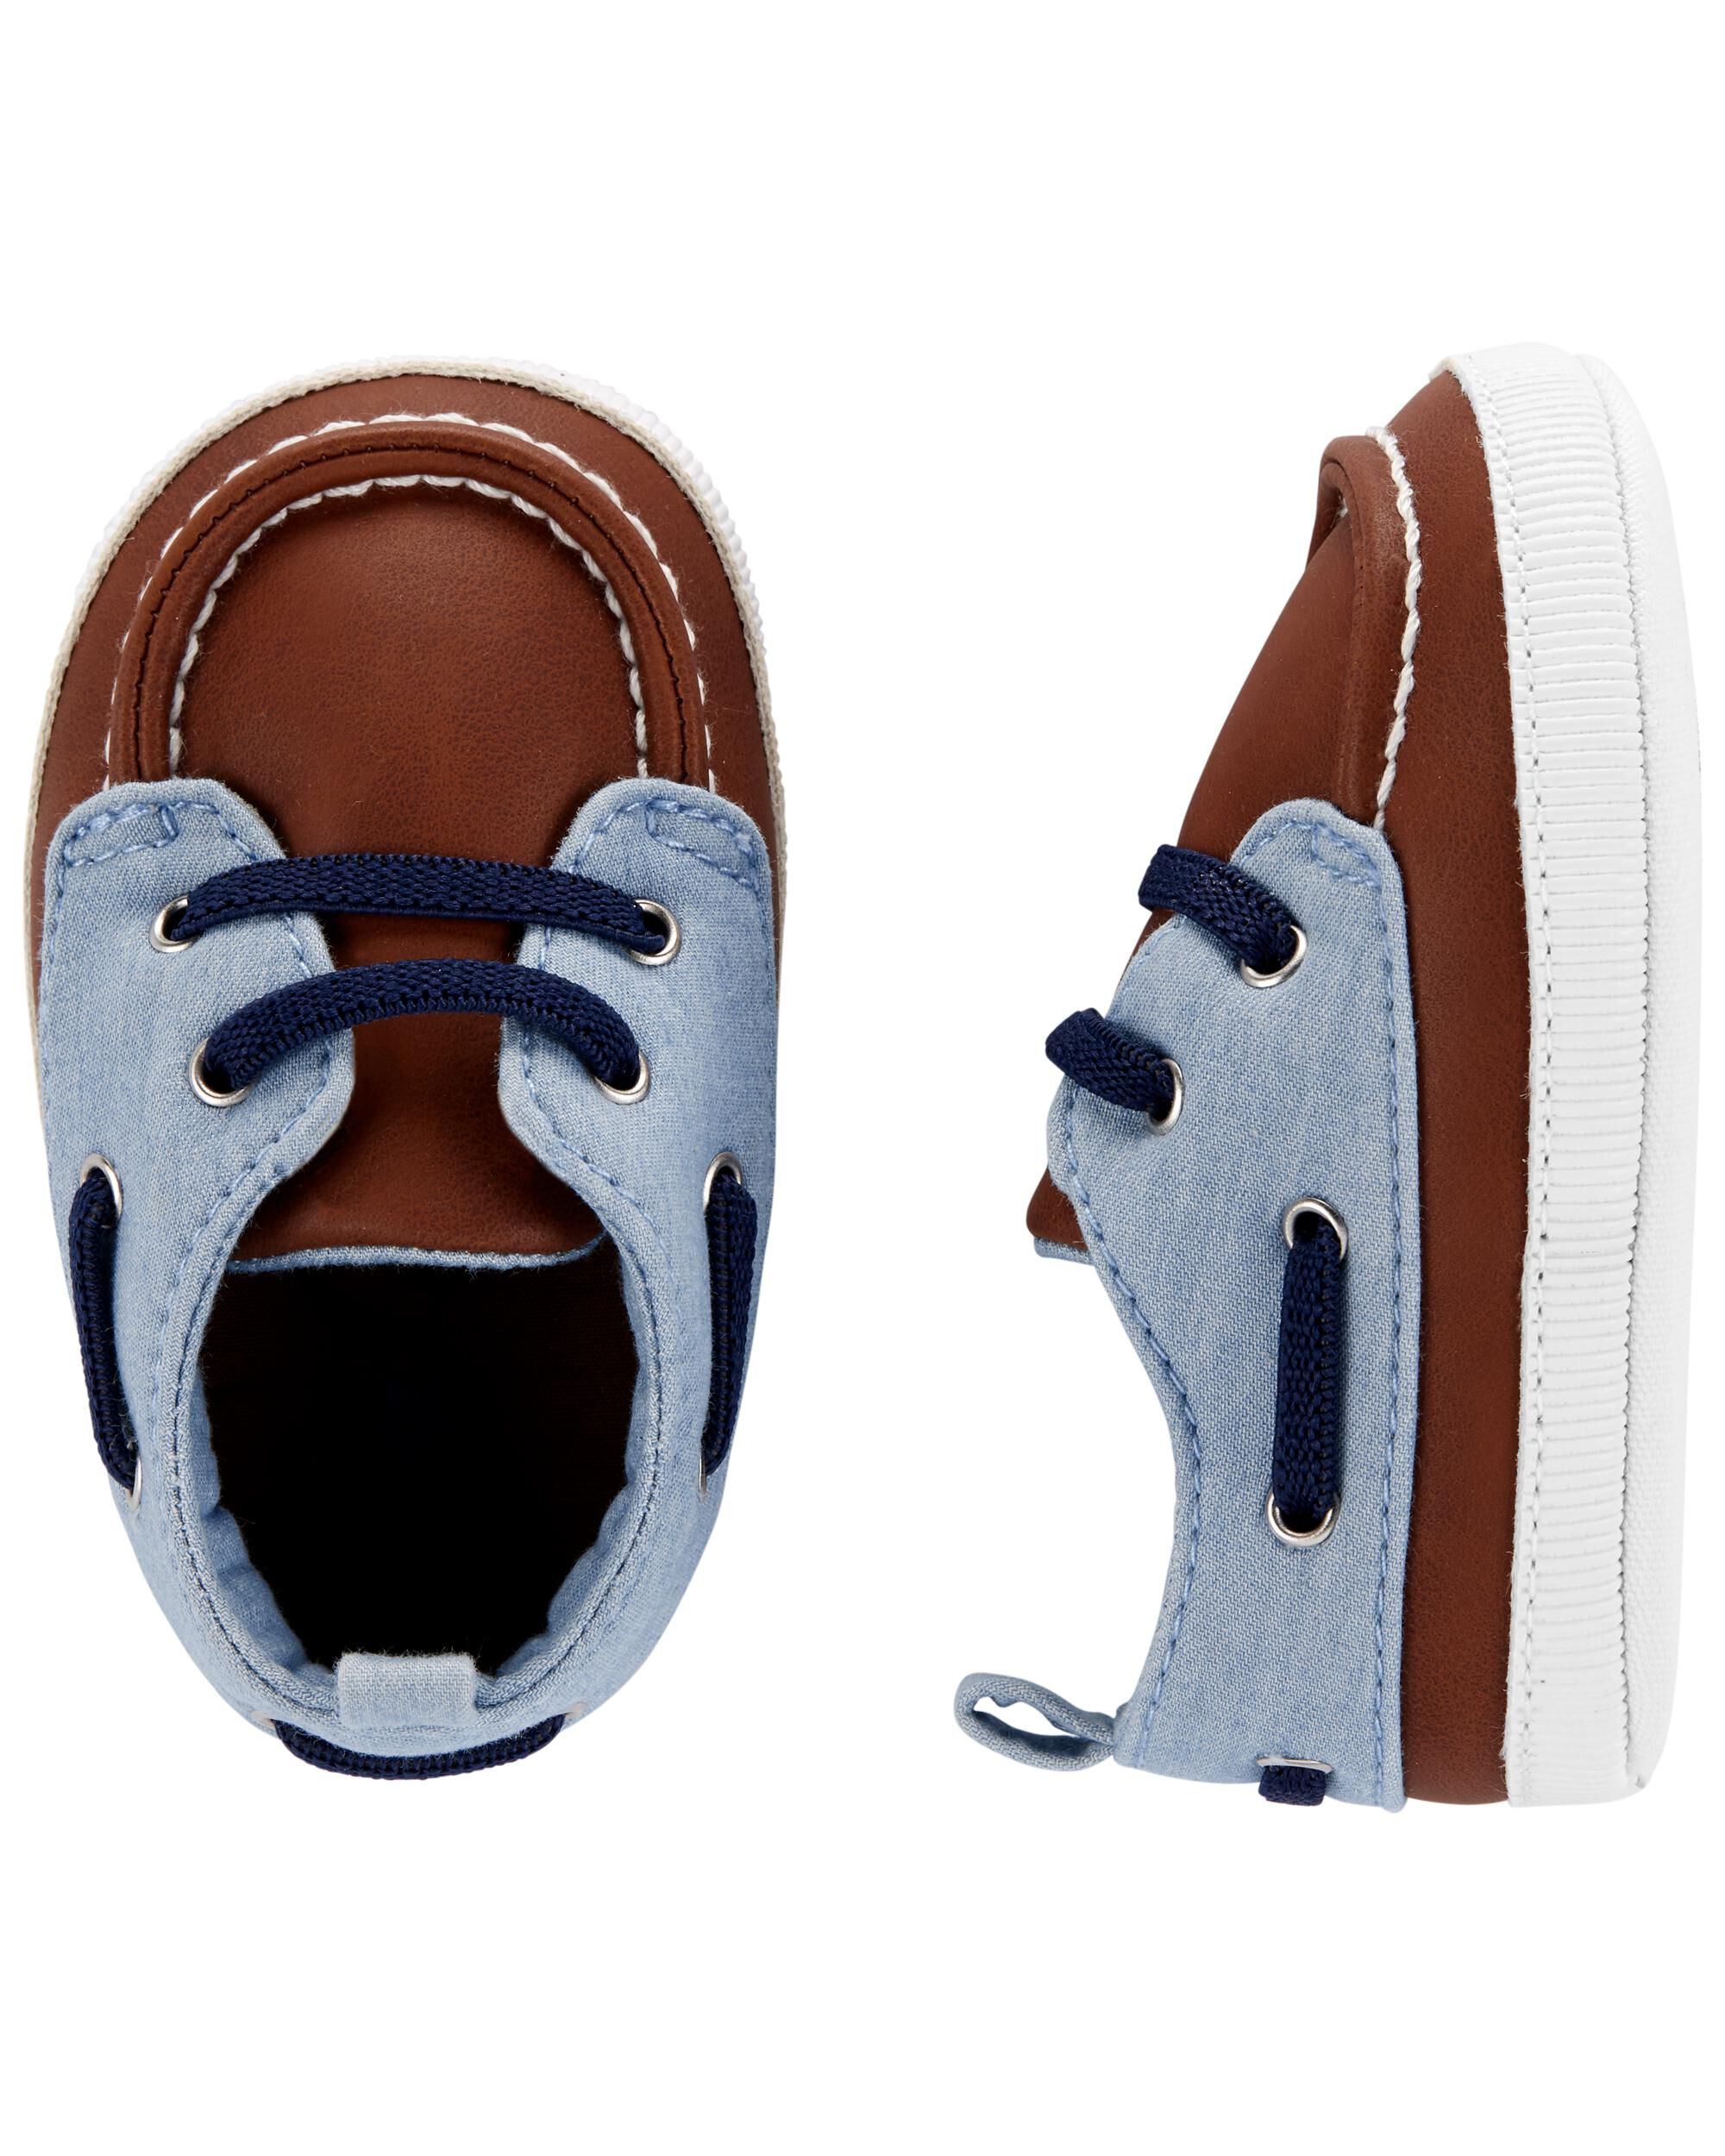 baby boat shoes